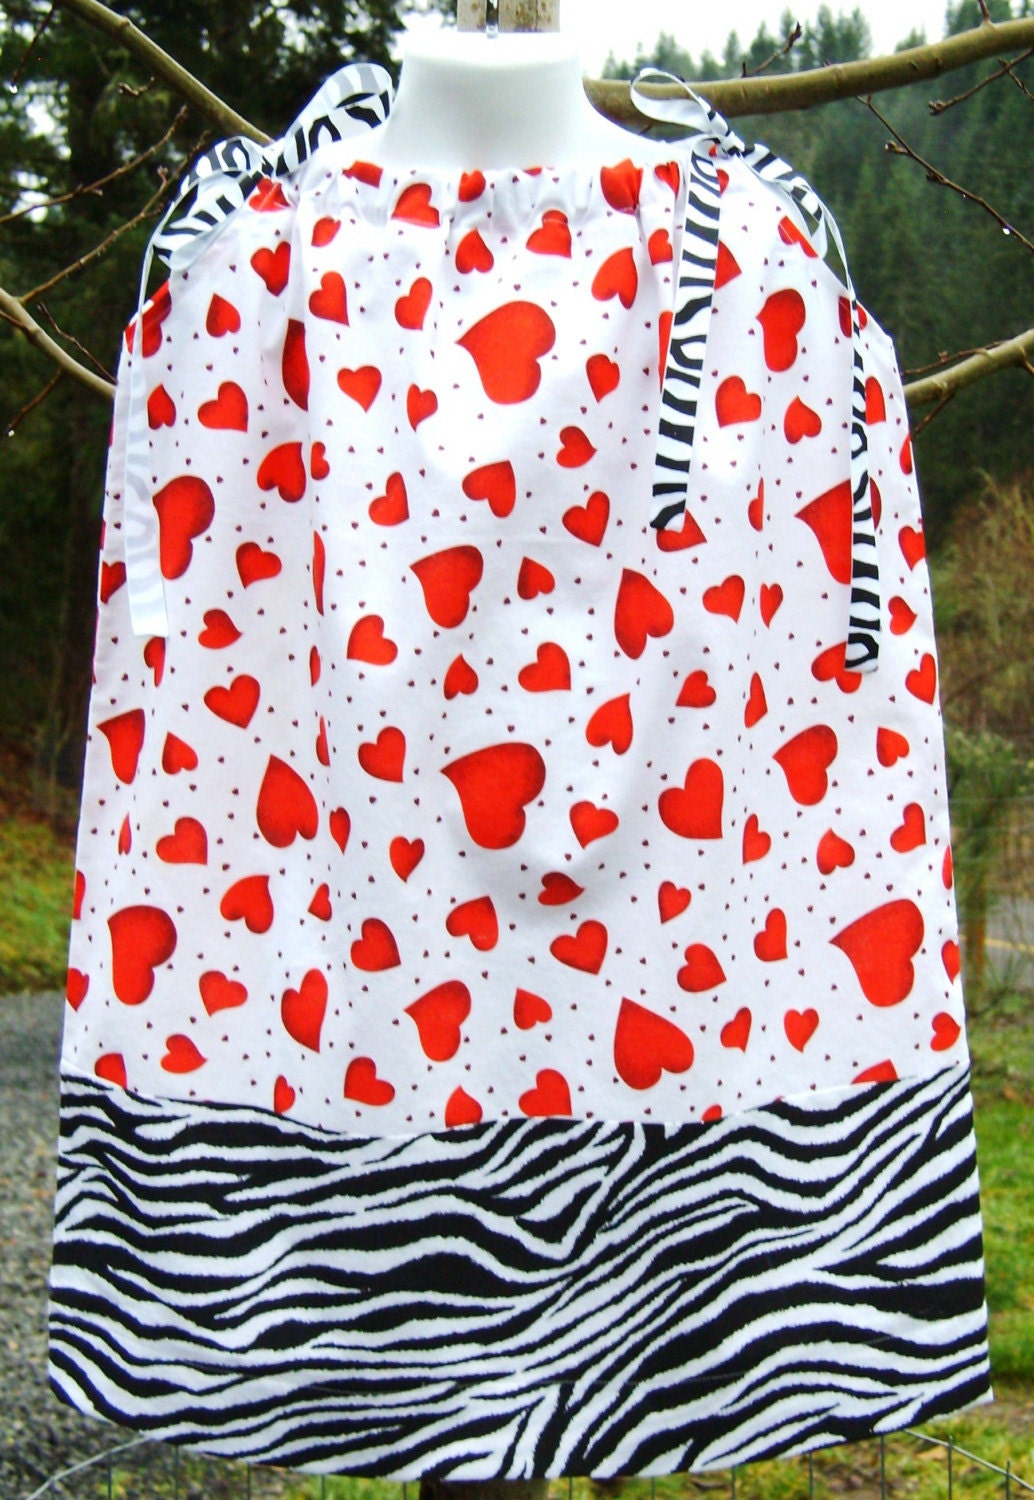 Floating Hearts and Zebra Stripes Valentines Day Girls Pillowcase Dress 12 mos 18 mos 2T 3T 4 5 6 